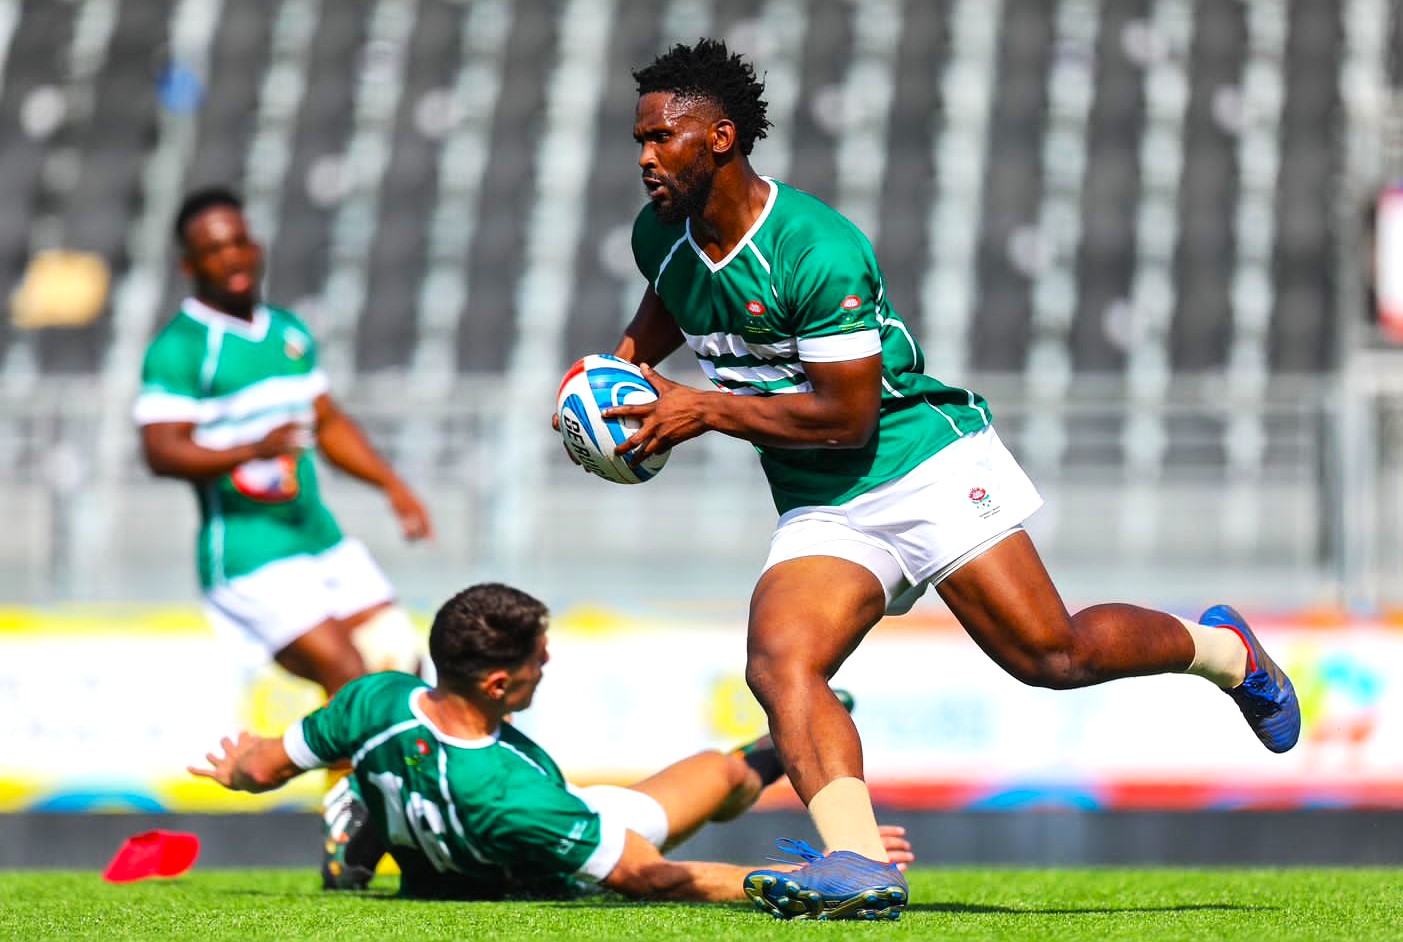 WSU RUGBY PLAYER SPORTS ADMINISTRATOR TO REPRESENT SA SQUAD AT INTERNATIOAL UNIVERSITY TOURNEY